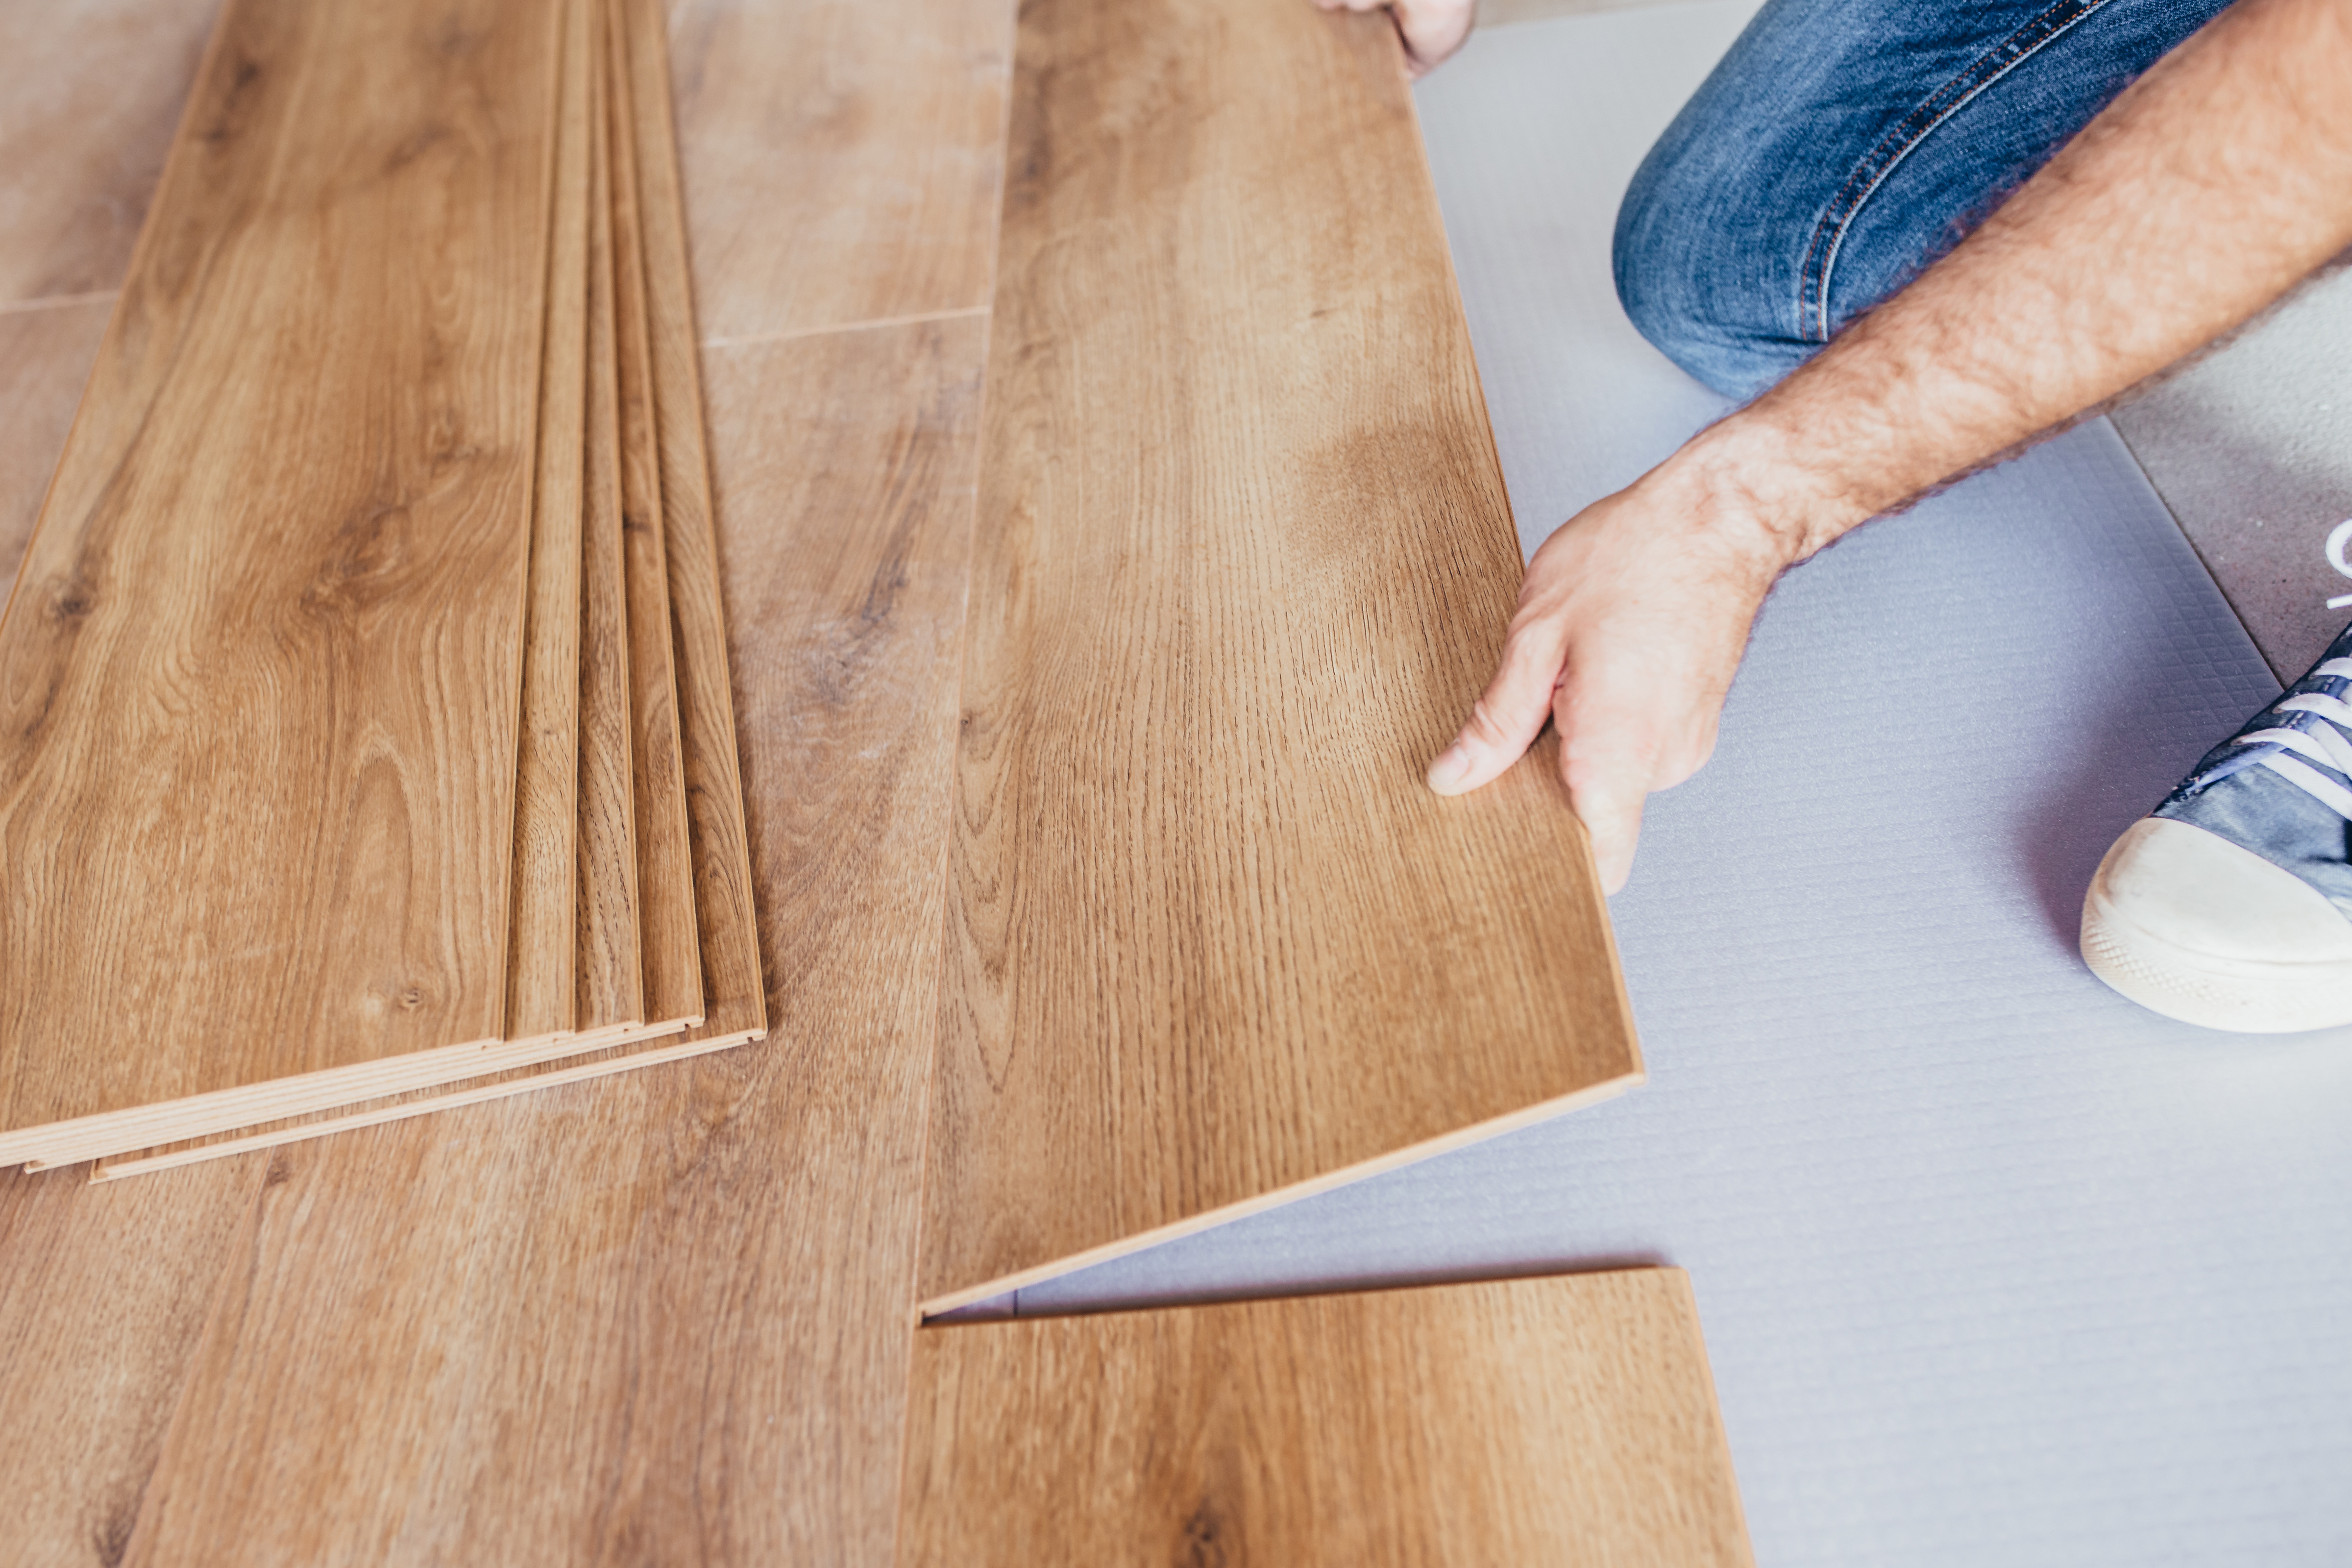 What Is A Floating Floor The Basics, How To Put Down Floating Laminate Flooring